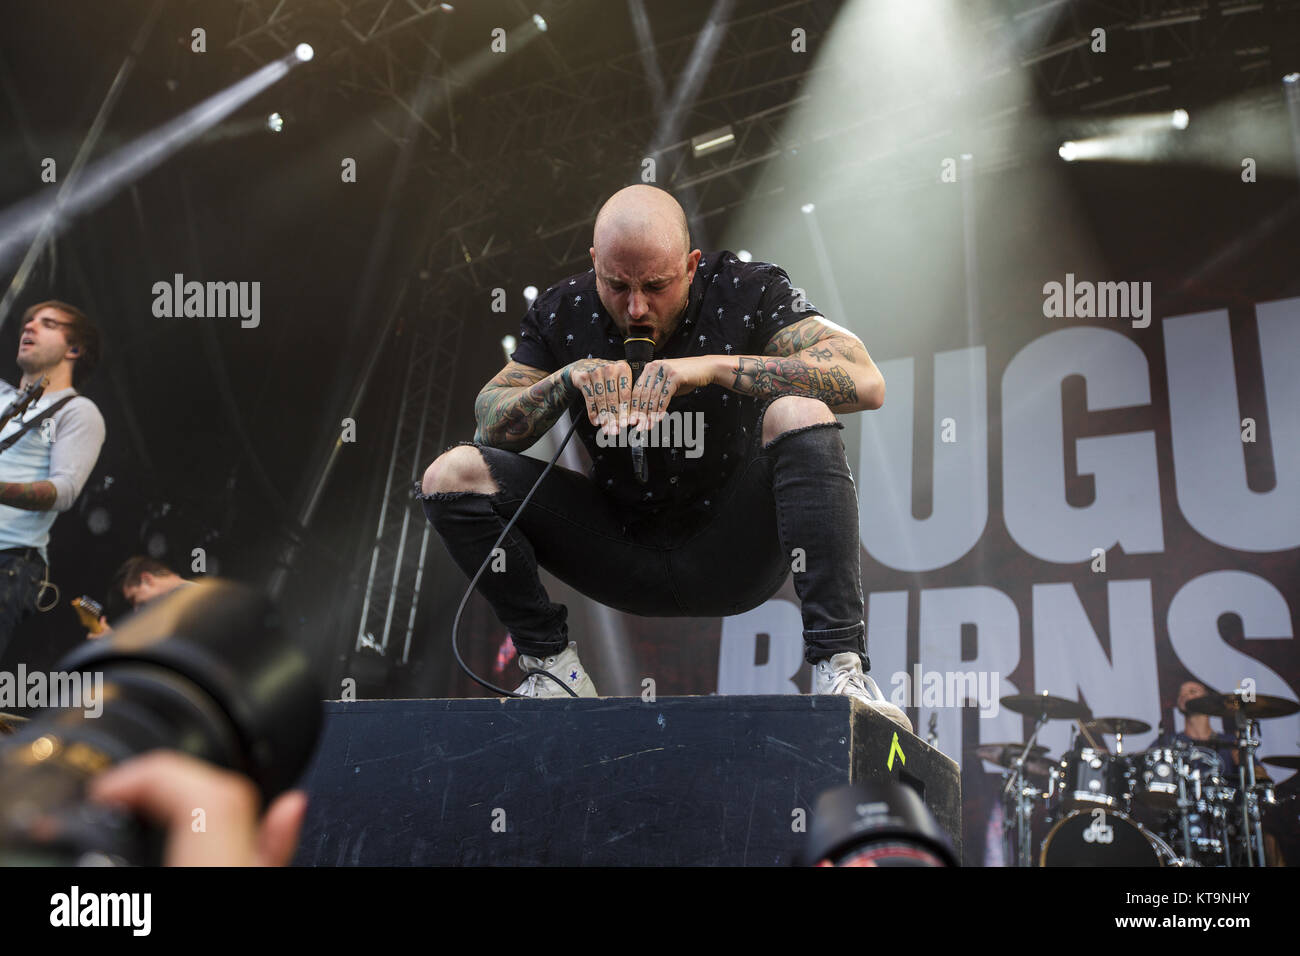 The American Christian Metalcore Band August Burns Red Performs A Stock Photo Alamy